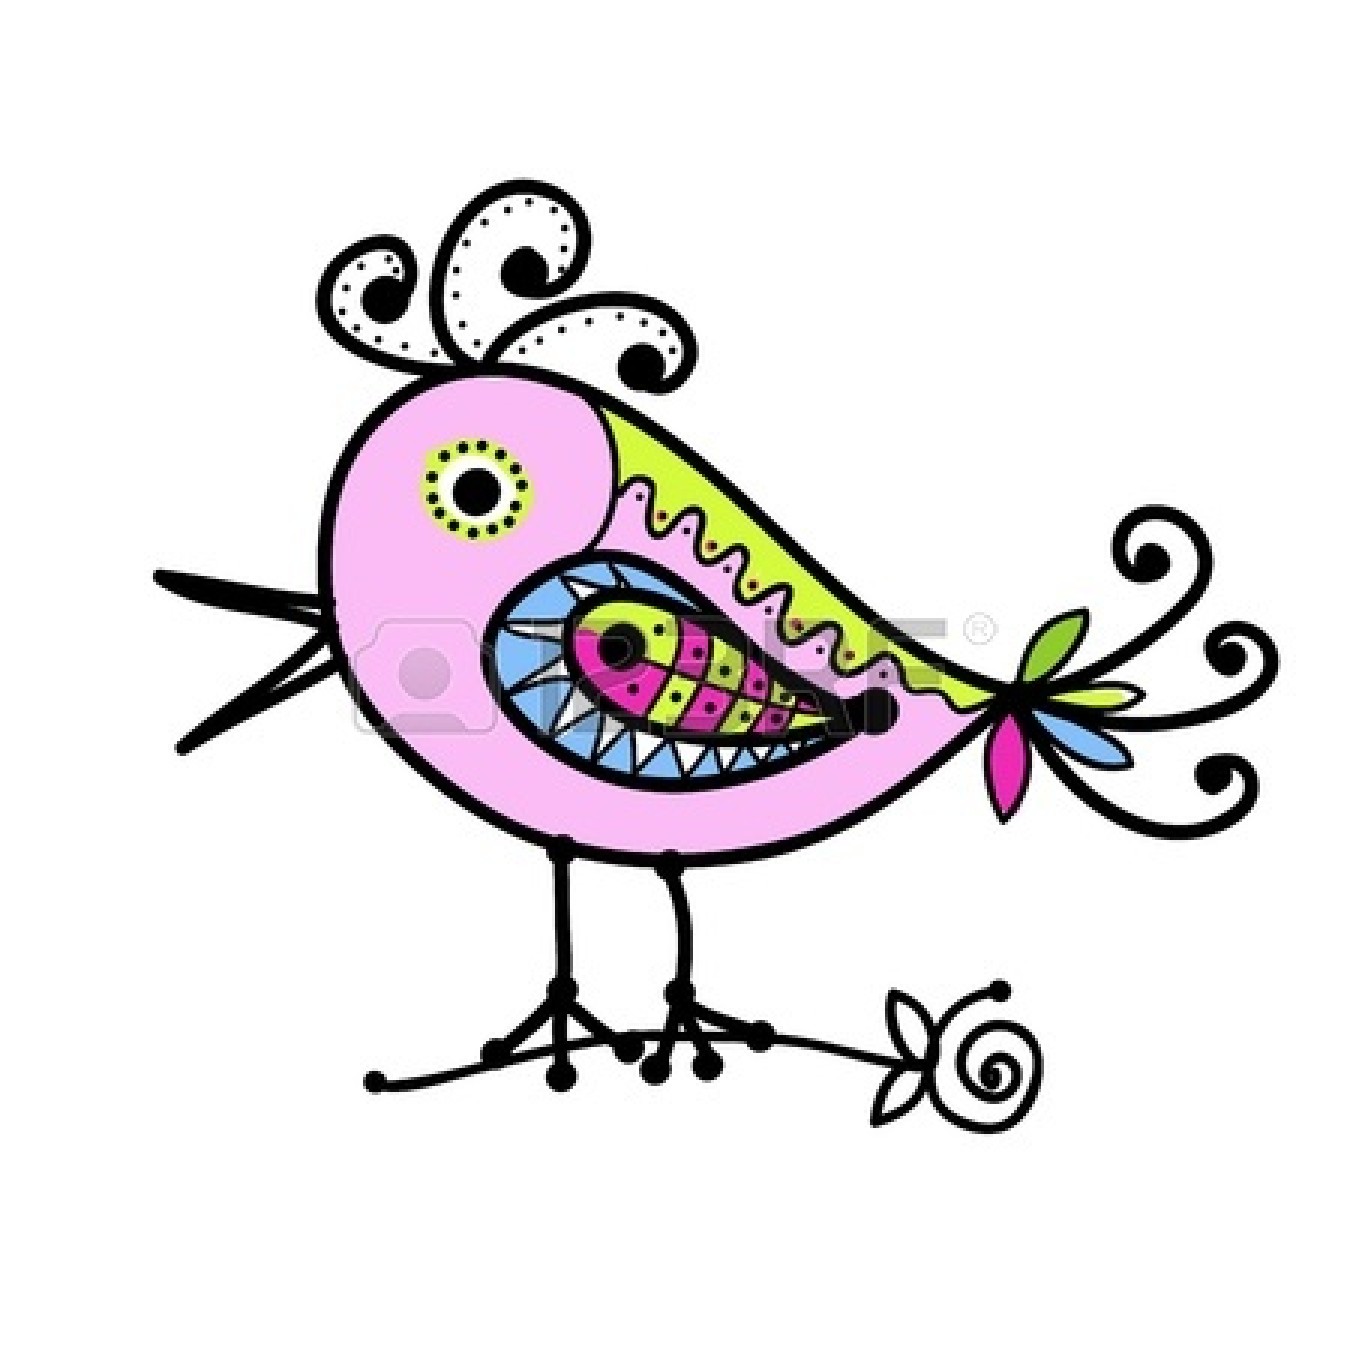 Bird Face Clip Art 15478165 Sketch Of Funny Colorful Bird For Your